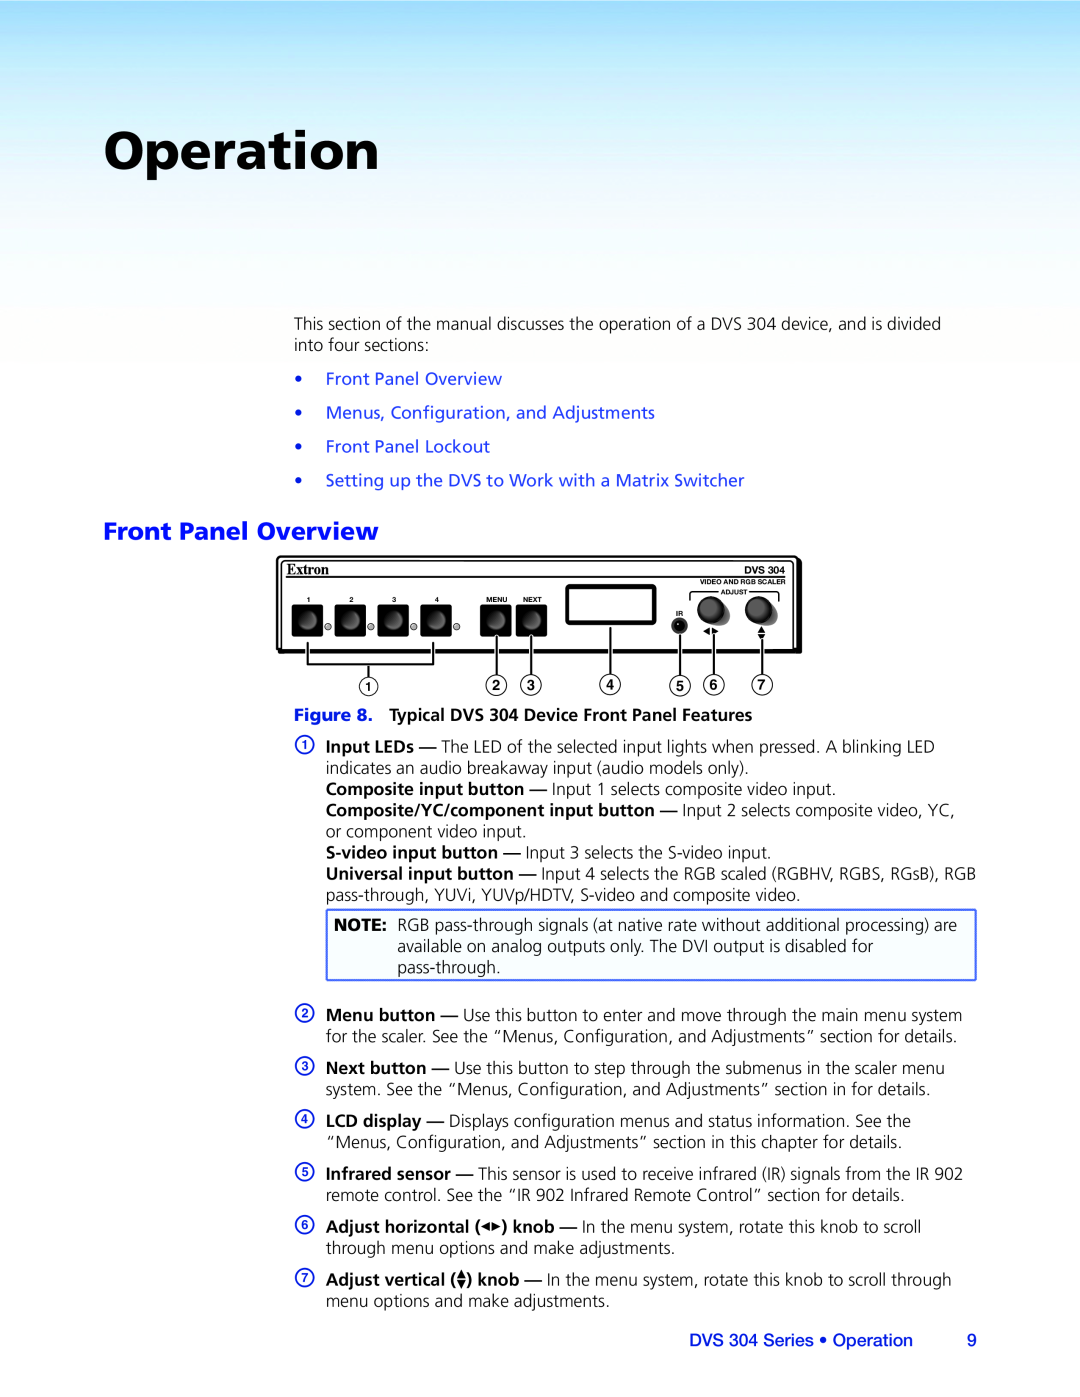 Extron electronic DVS 304 manual Operation, •Front Panel Overview, •Menus, Configuration, and Adjustments 